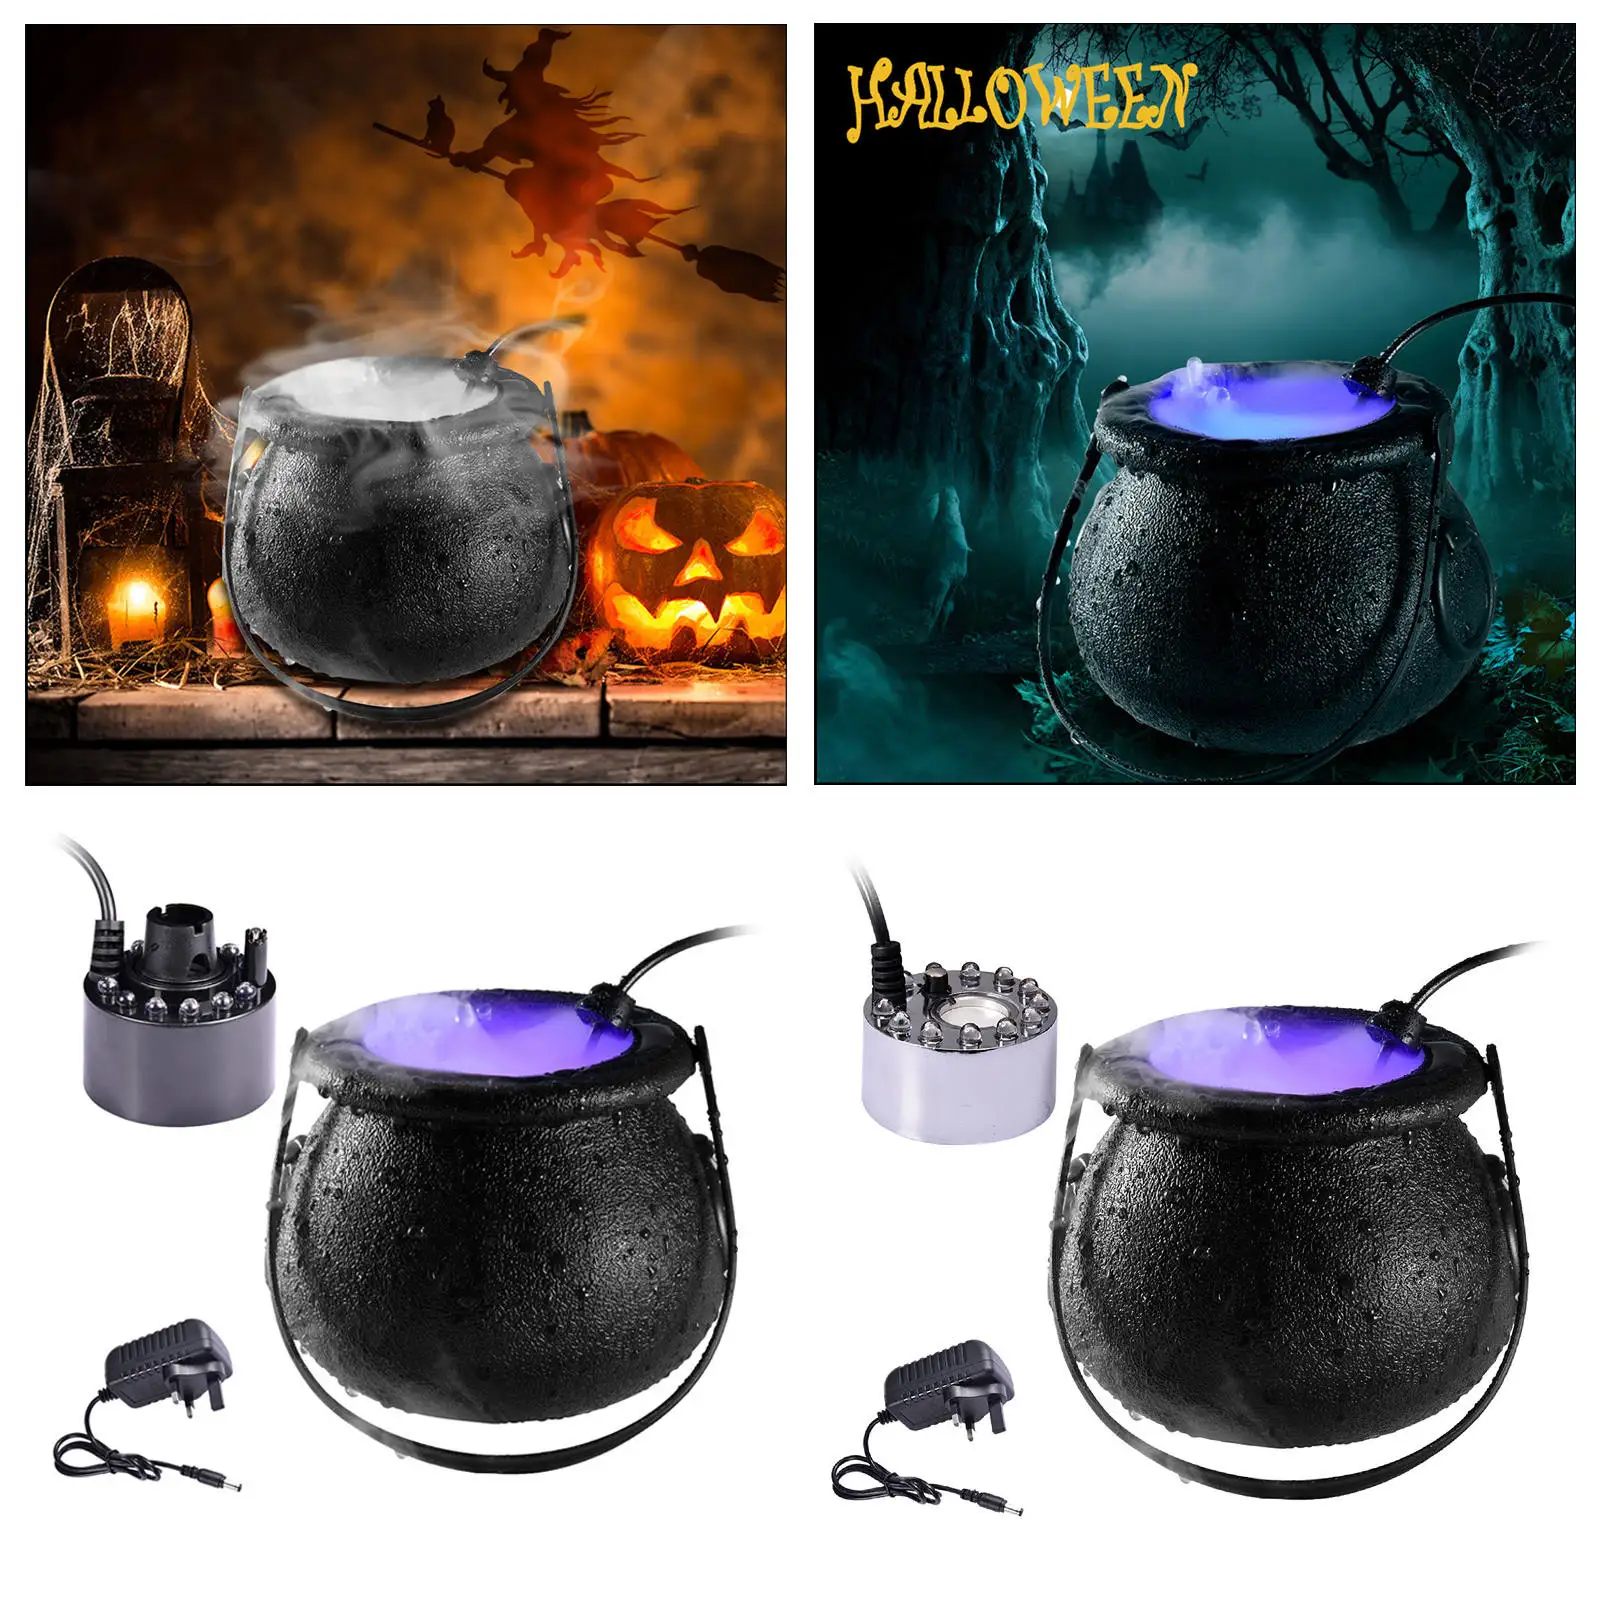 Mist Maker 12 LED Fogger Outdoor Water Fountain Ghost House Fog Machine Waterproof for Halloween Office Room Fish Tank Decor